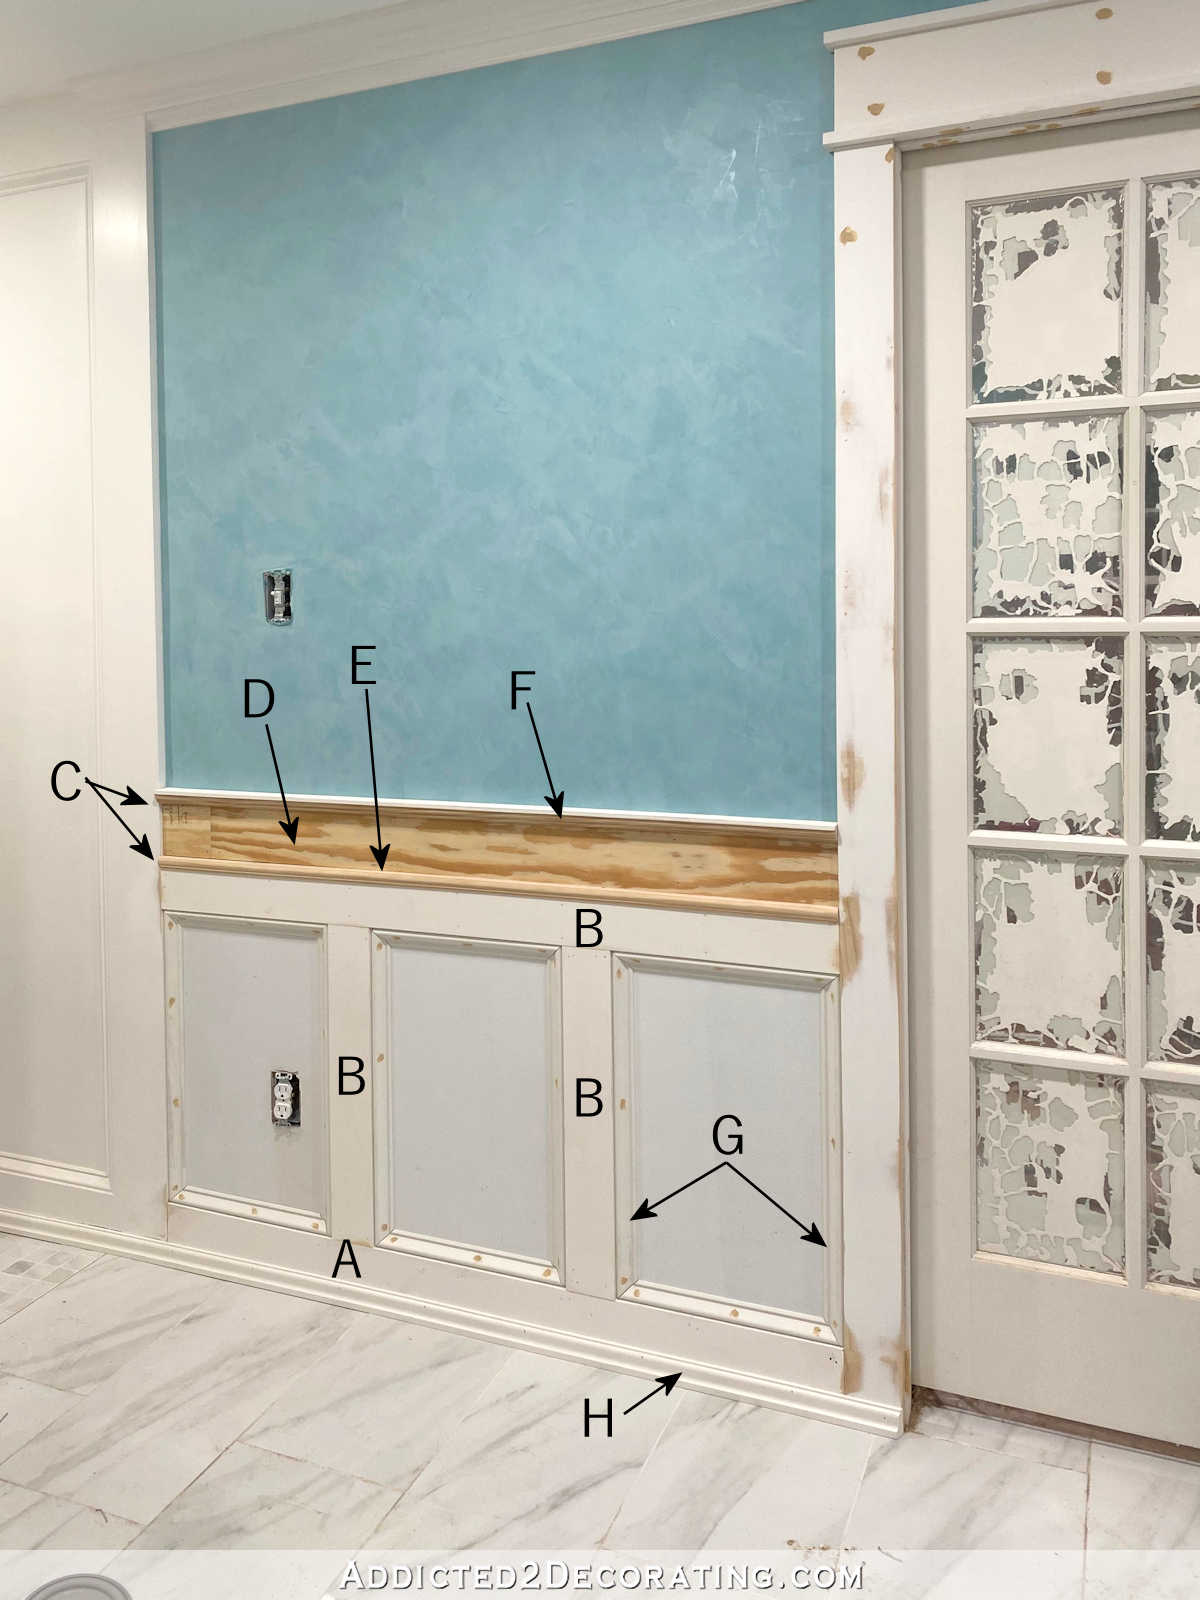 DIY Wainscoting Part 1 — The Anatomy Of Judge’s Paneling With Tile Accent (Bathroom Walls)